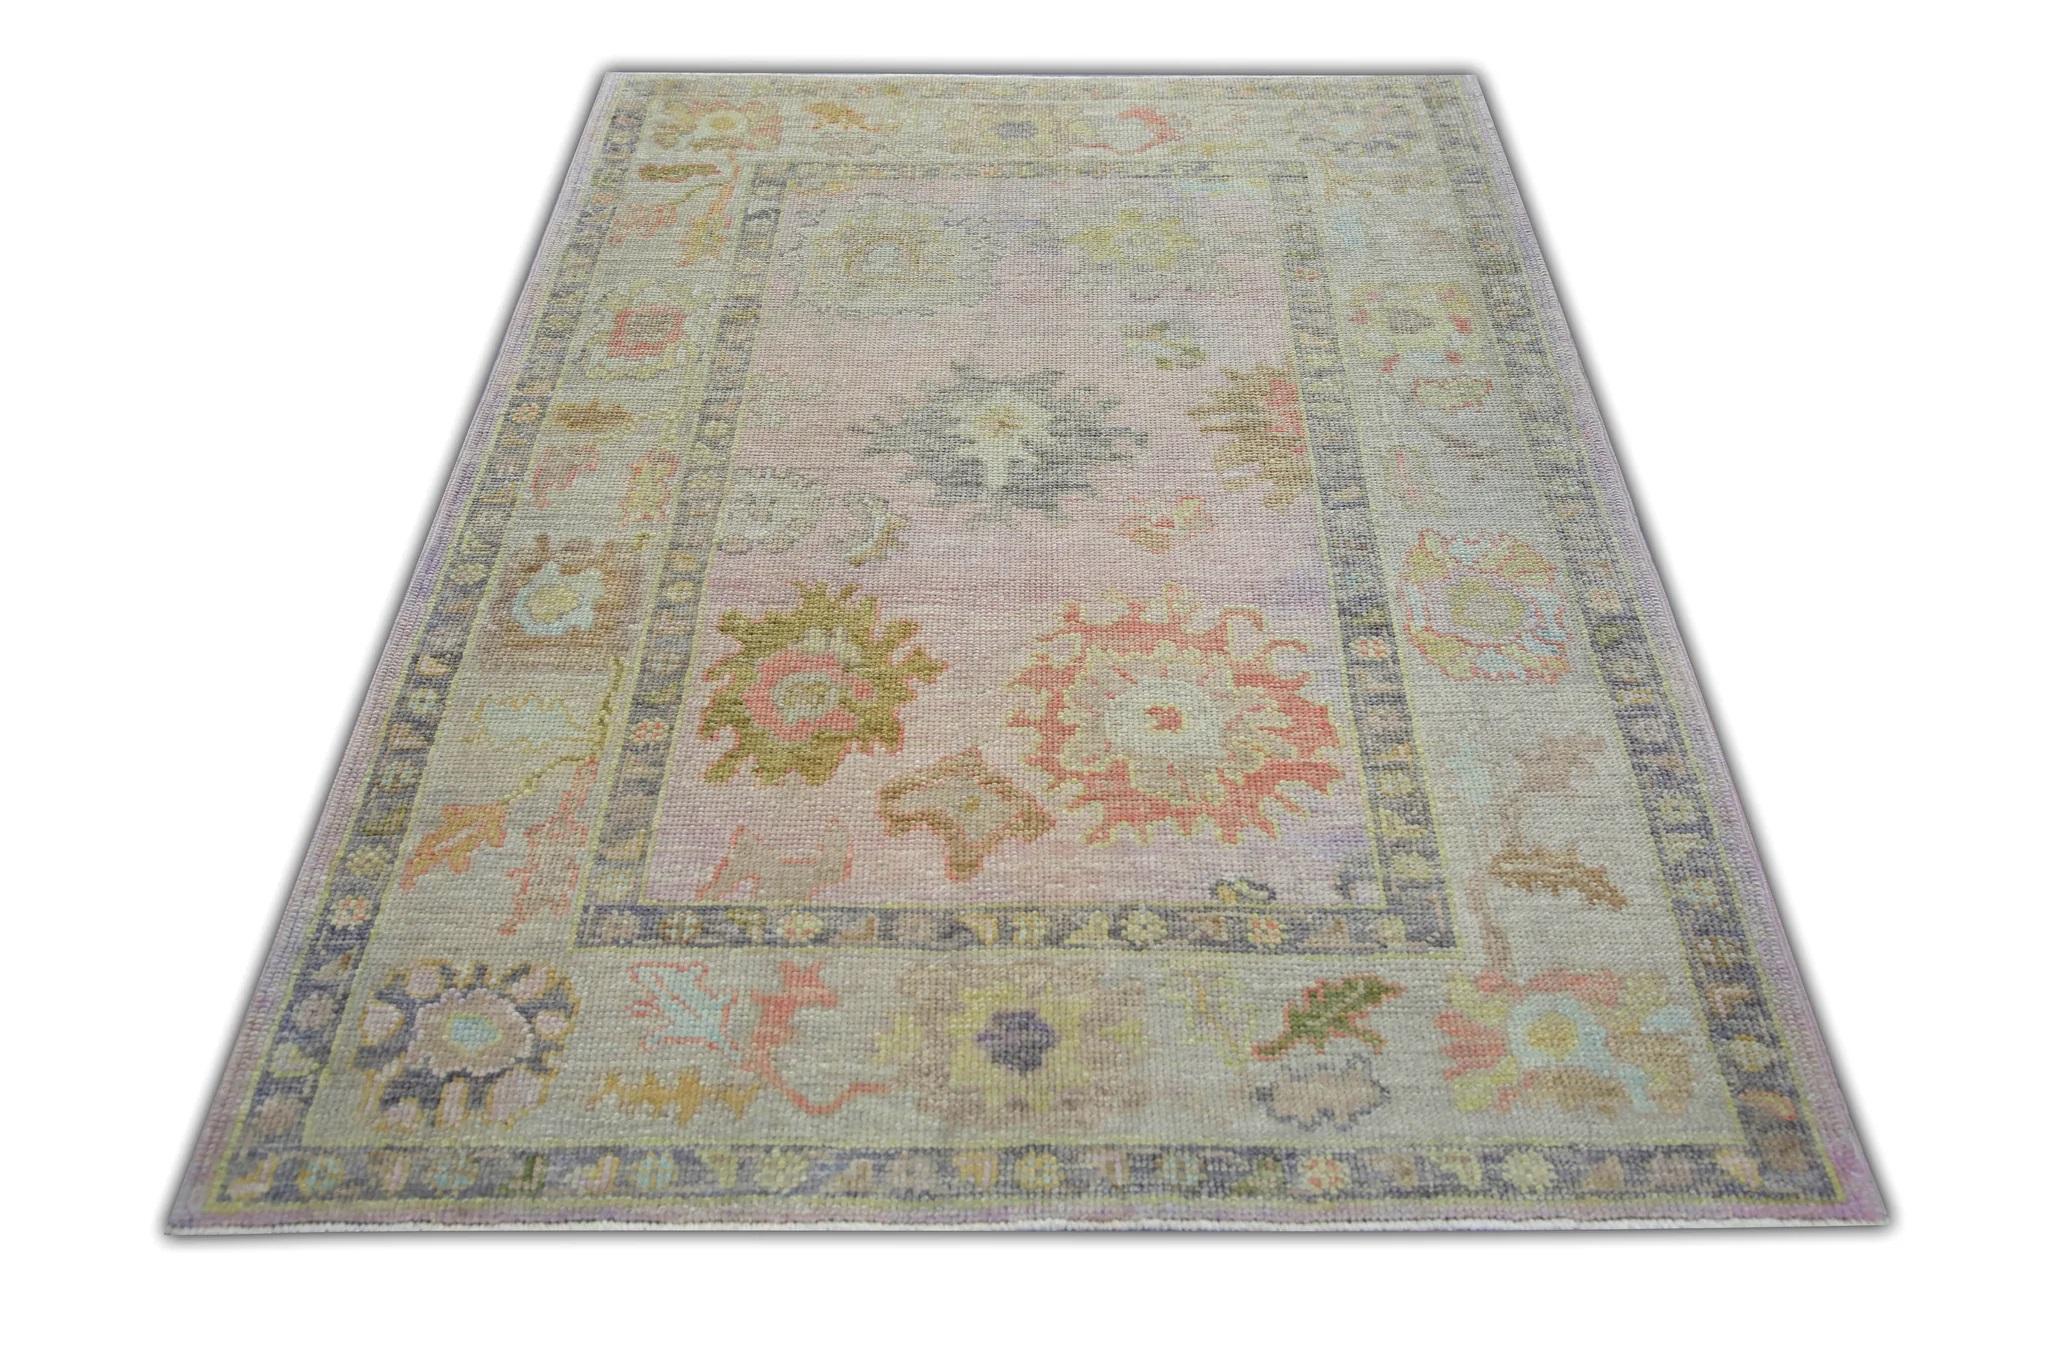 Contemporary Handwoven Wool Turkish Oushak Rug w/ Colorful Pastel Floral Design 4'1